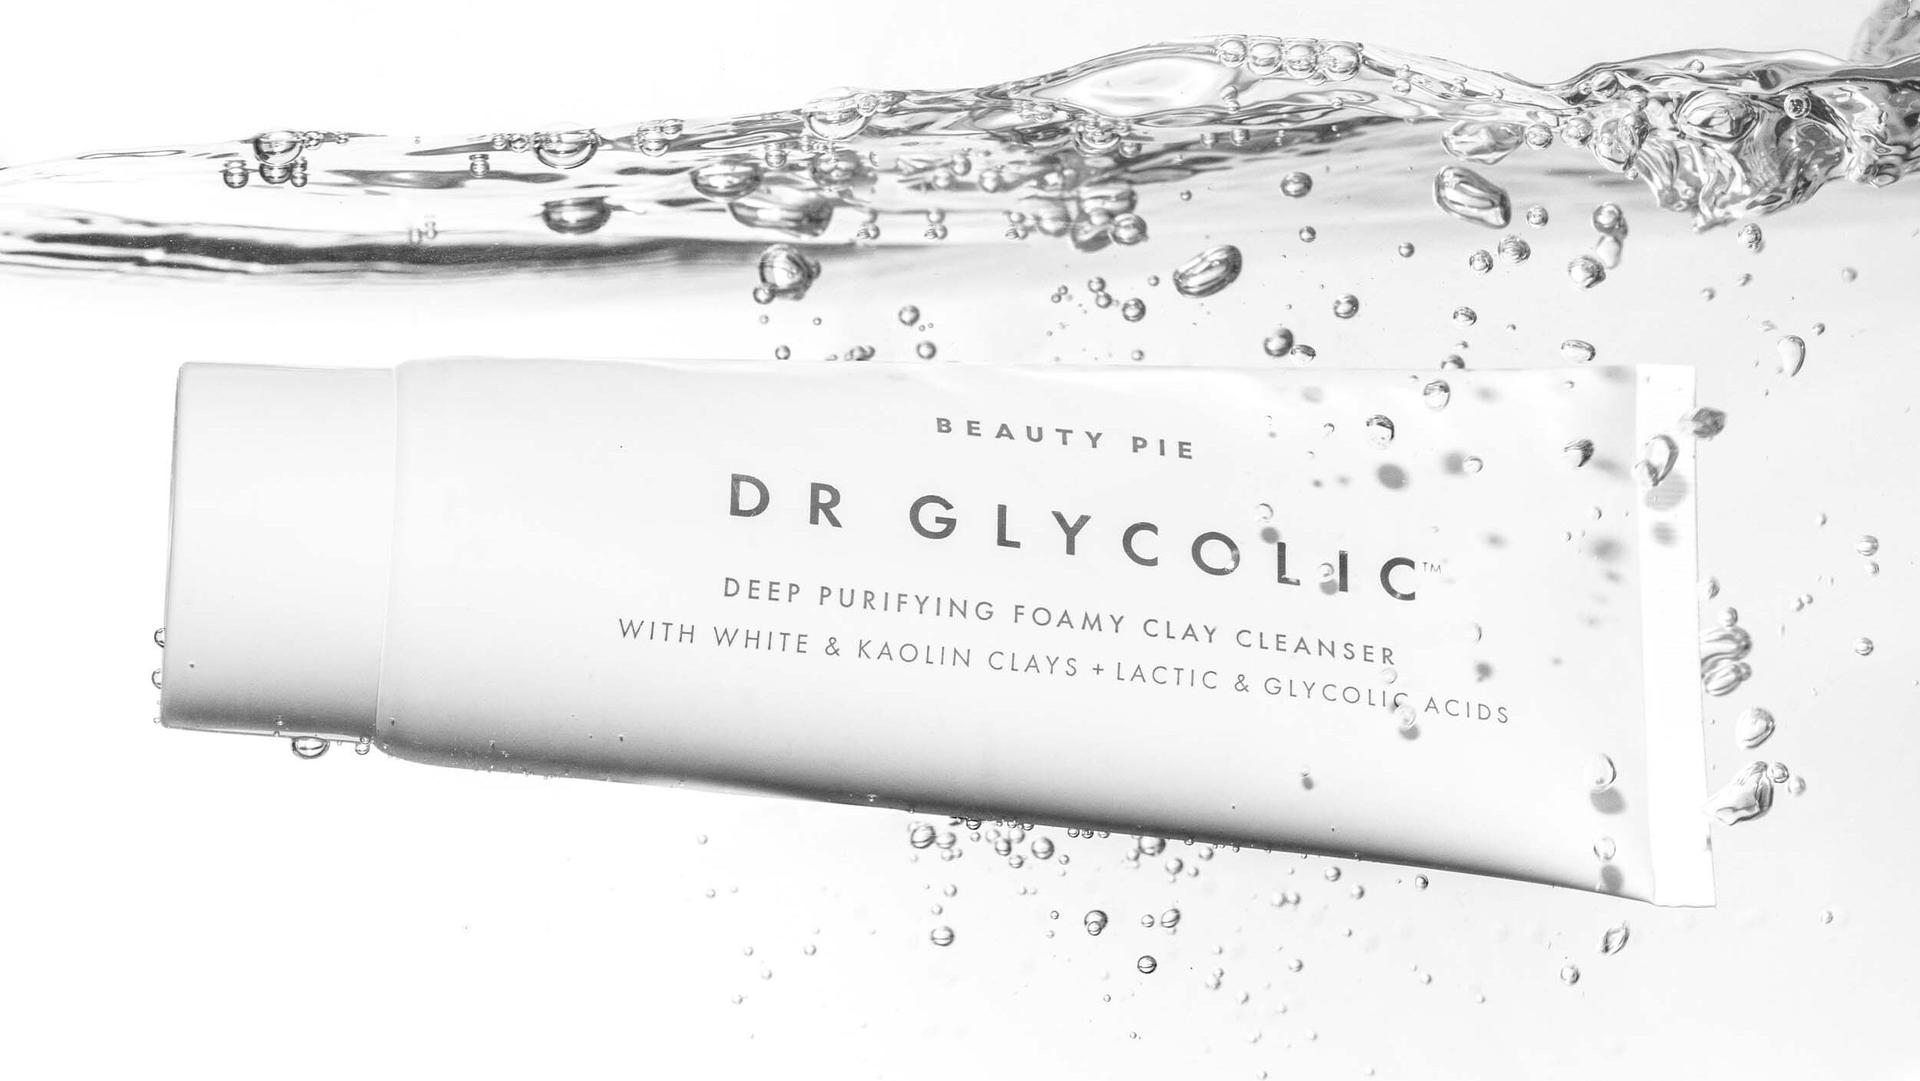 BEAUTY PIE Dr Glycolic Purifying Clay Cleanser